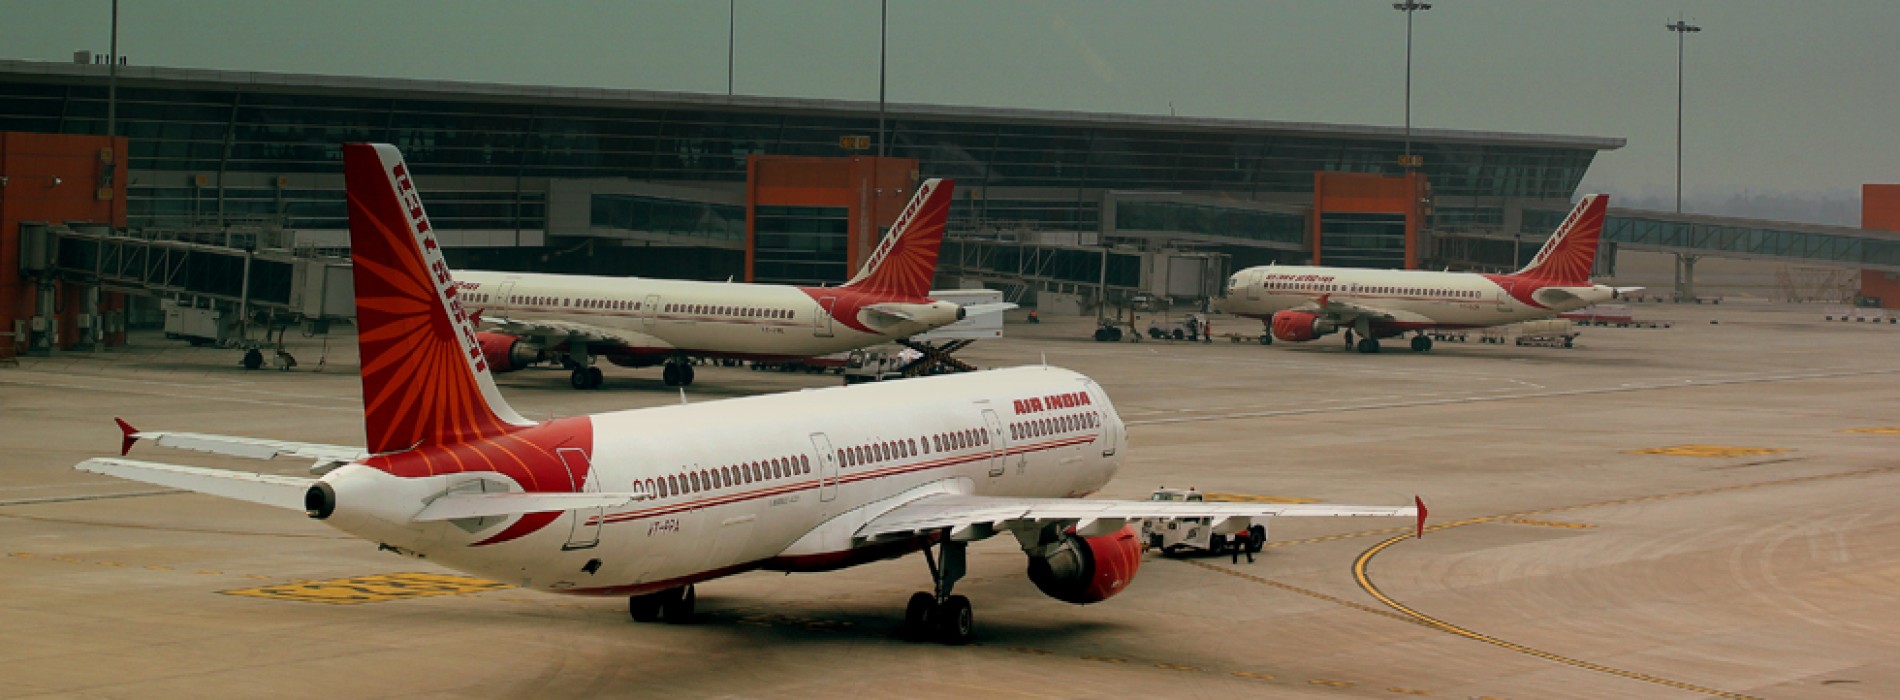 Air India stake sale: Government mulls absorbing employees in PSUs